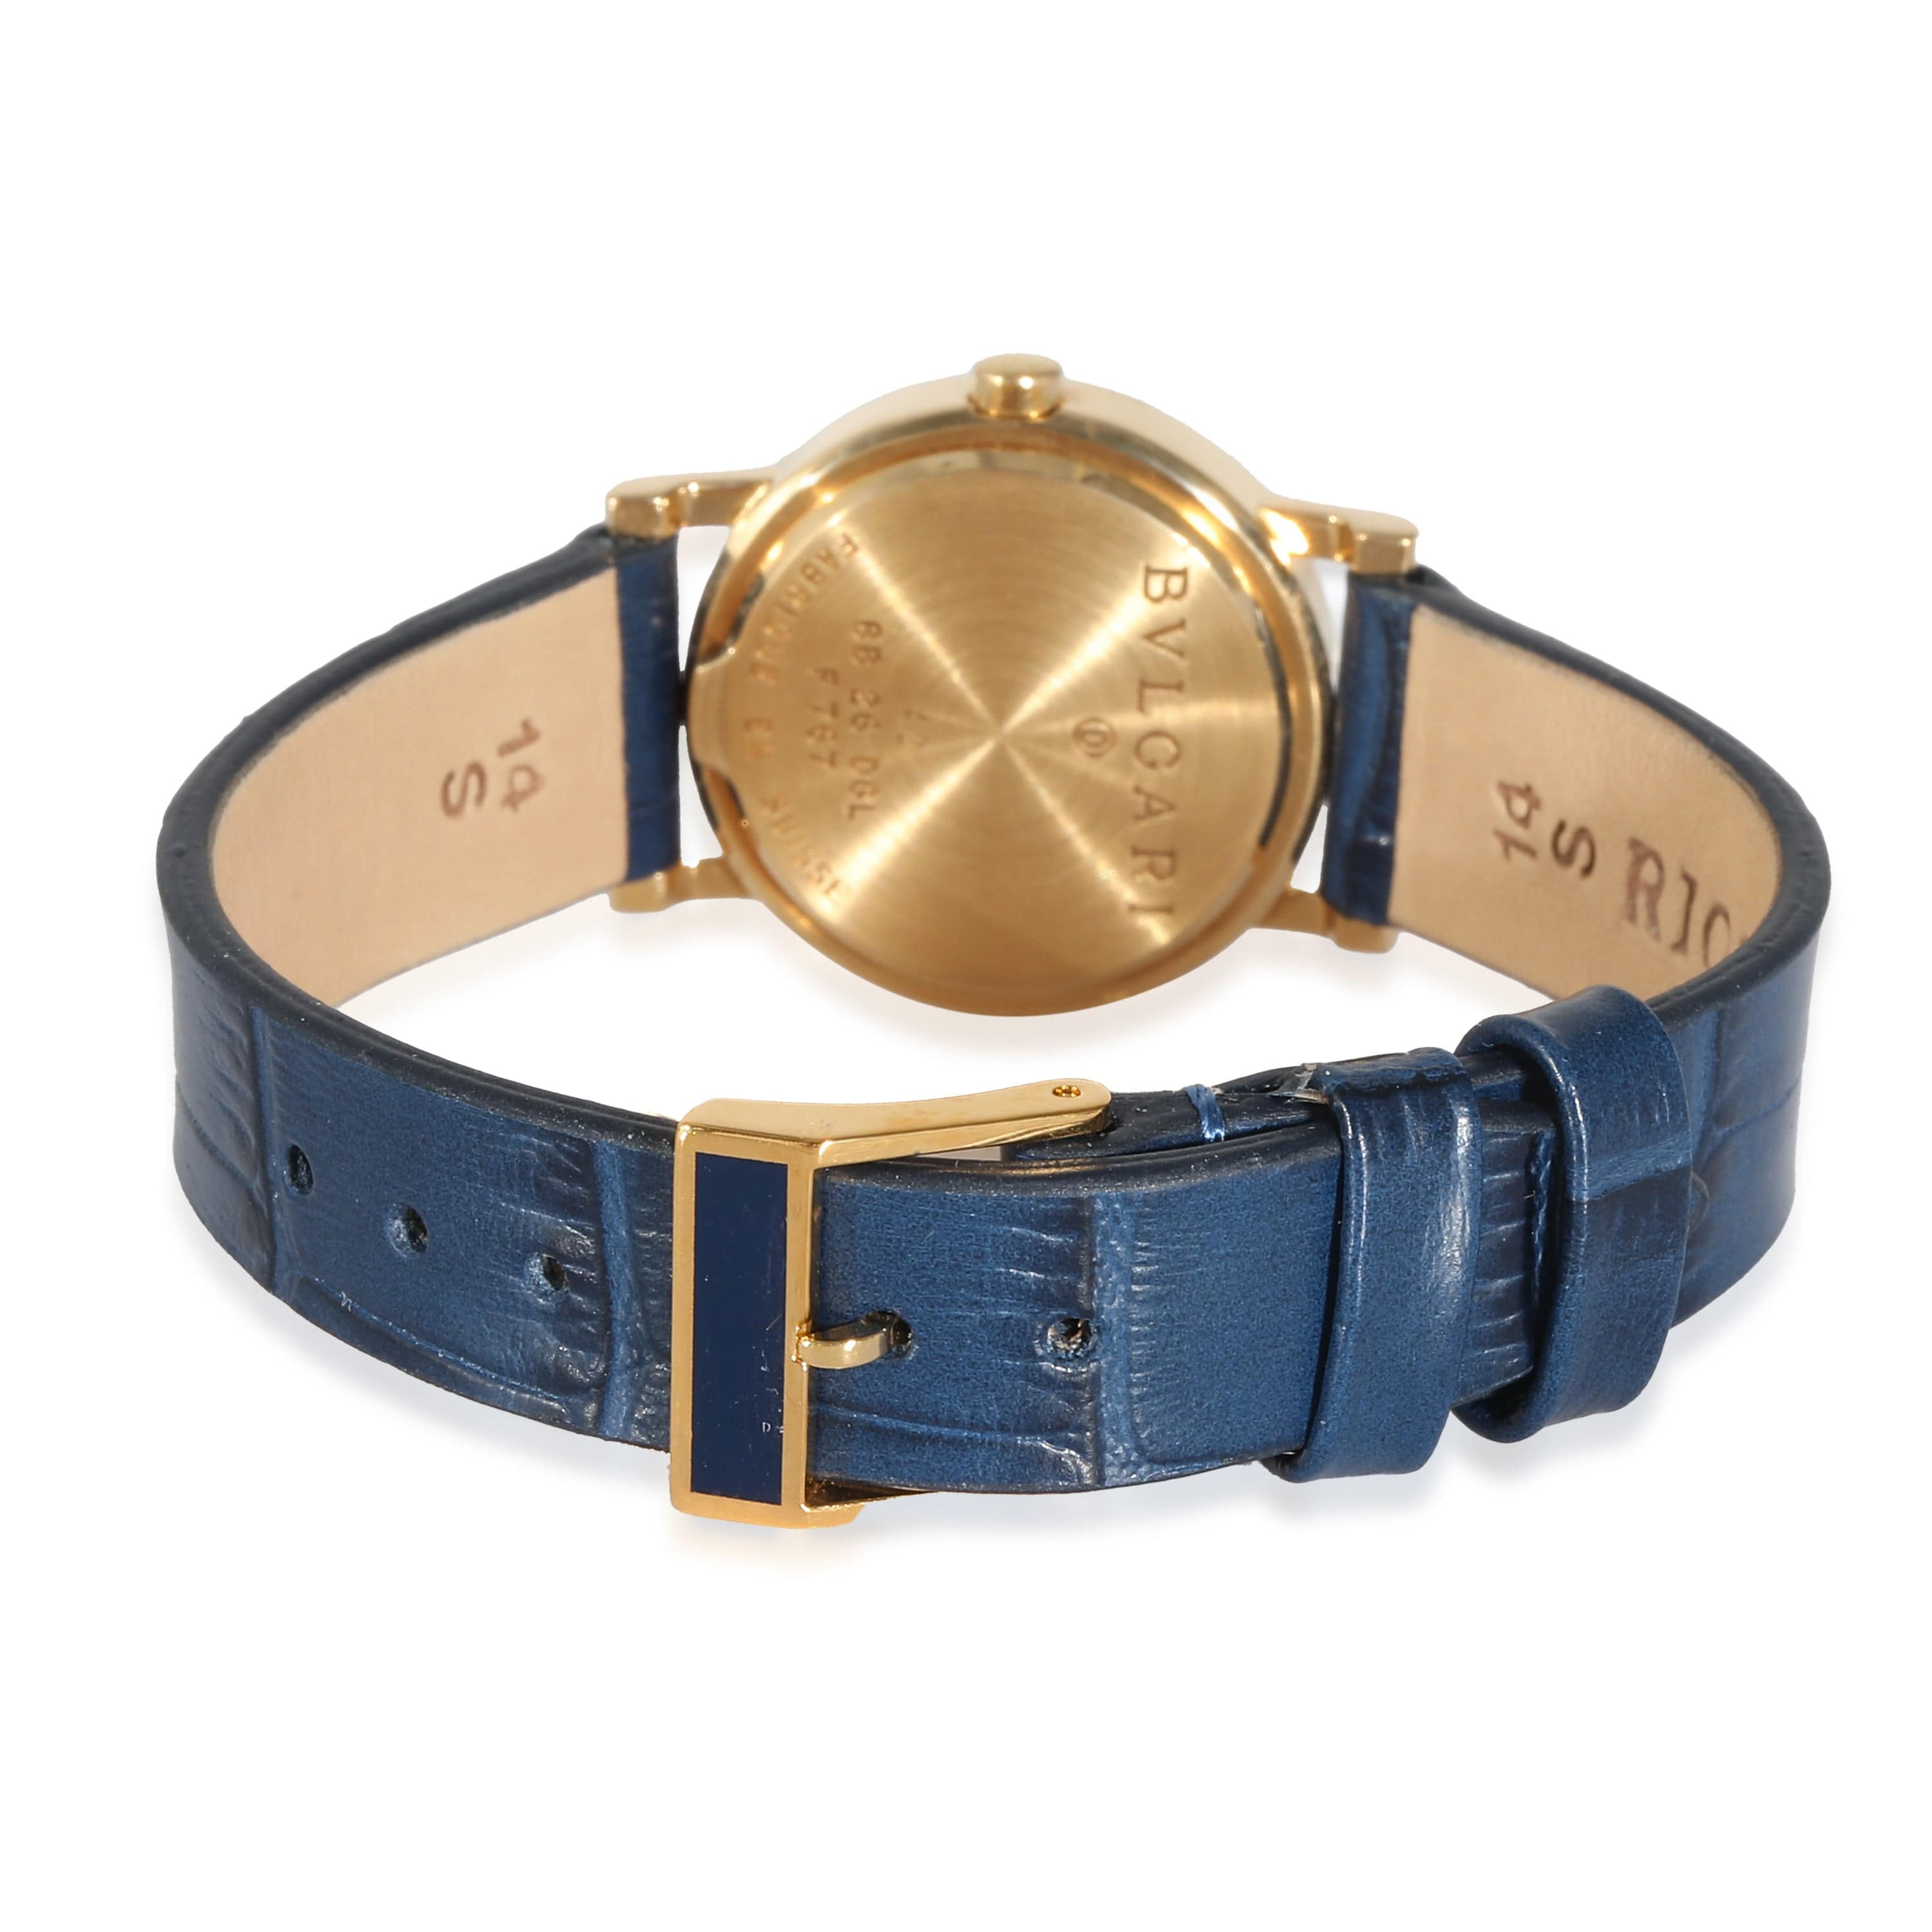 BVLGARI BVLGARI Bvlgari Bvlgari BB 26 DGL Women's Watch in 18kt Yellow Gold